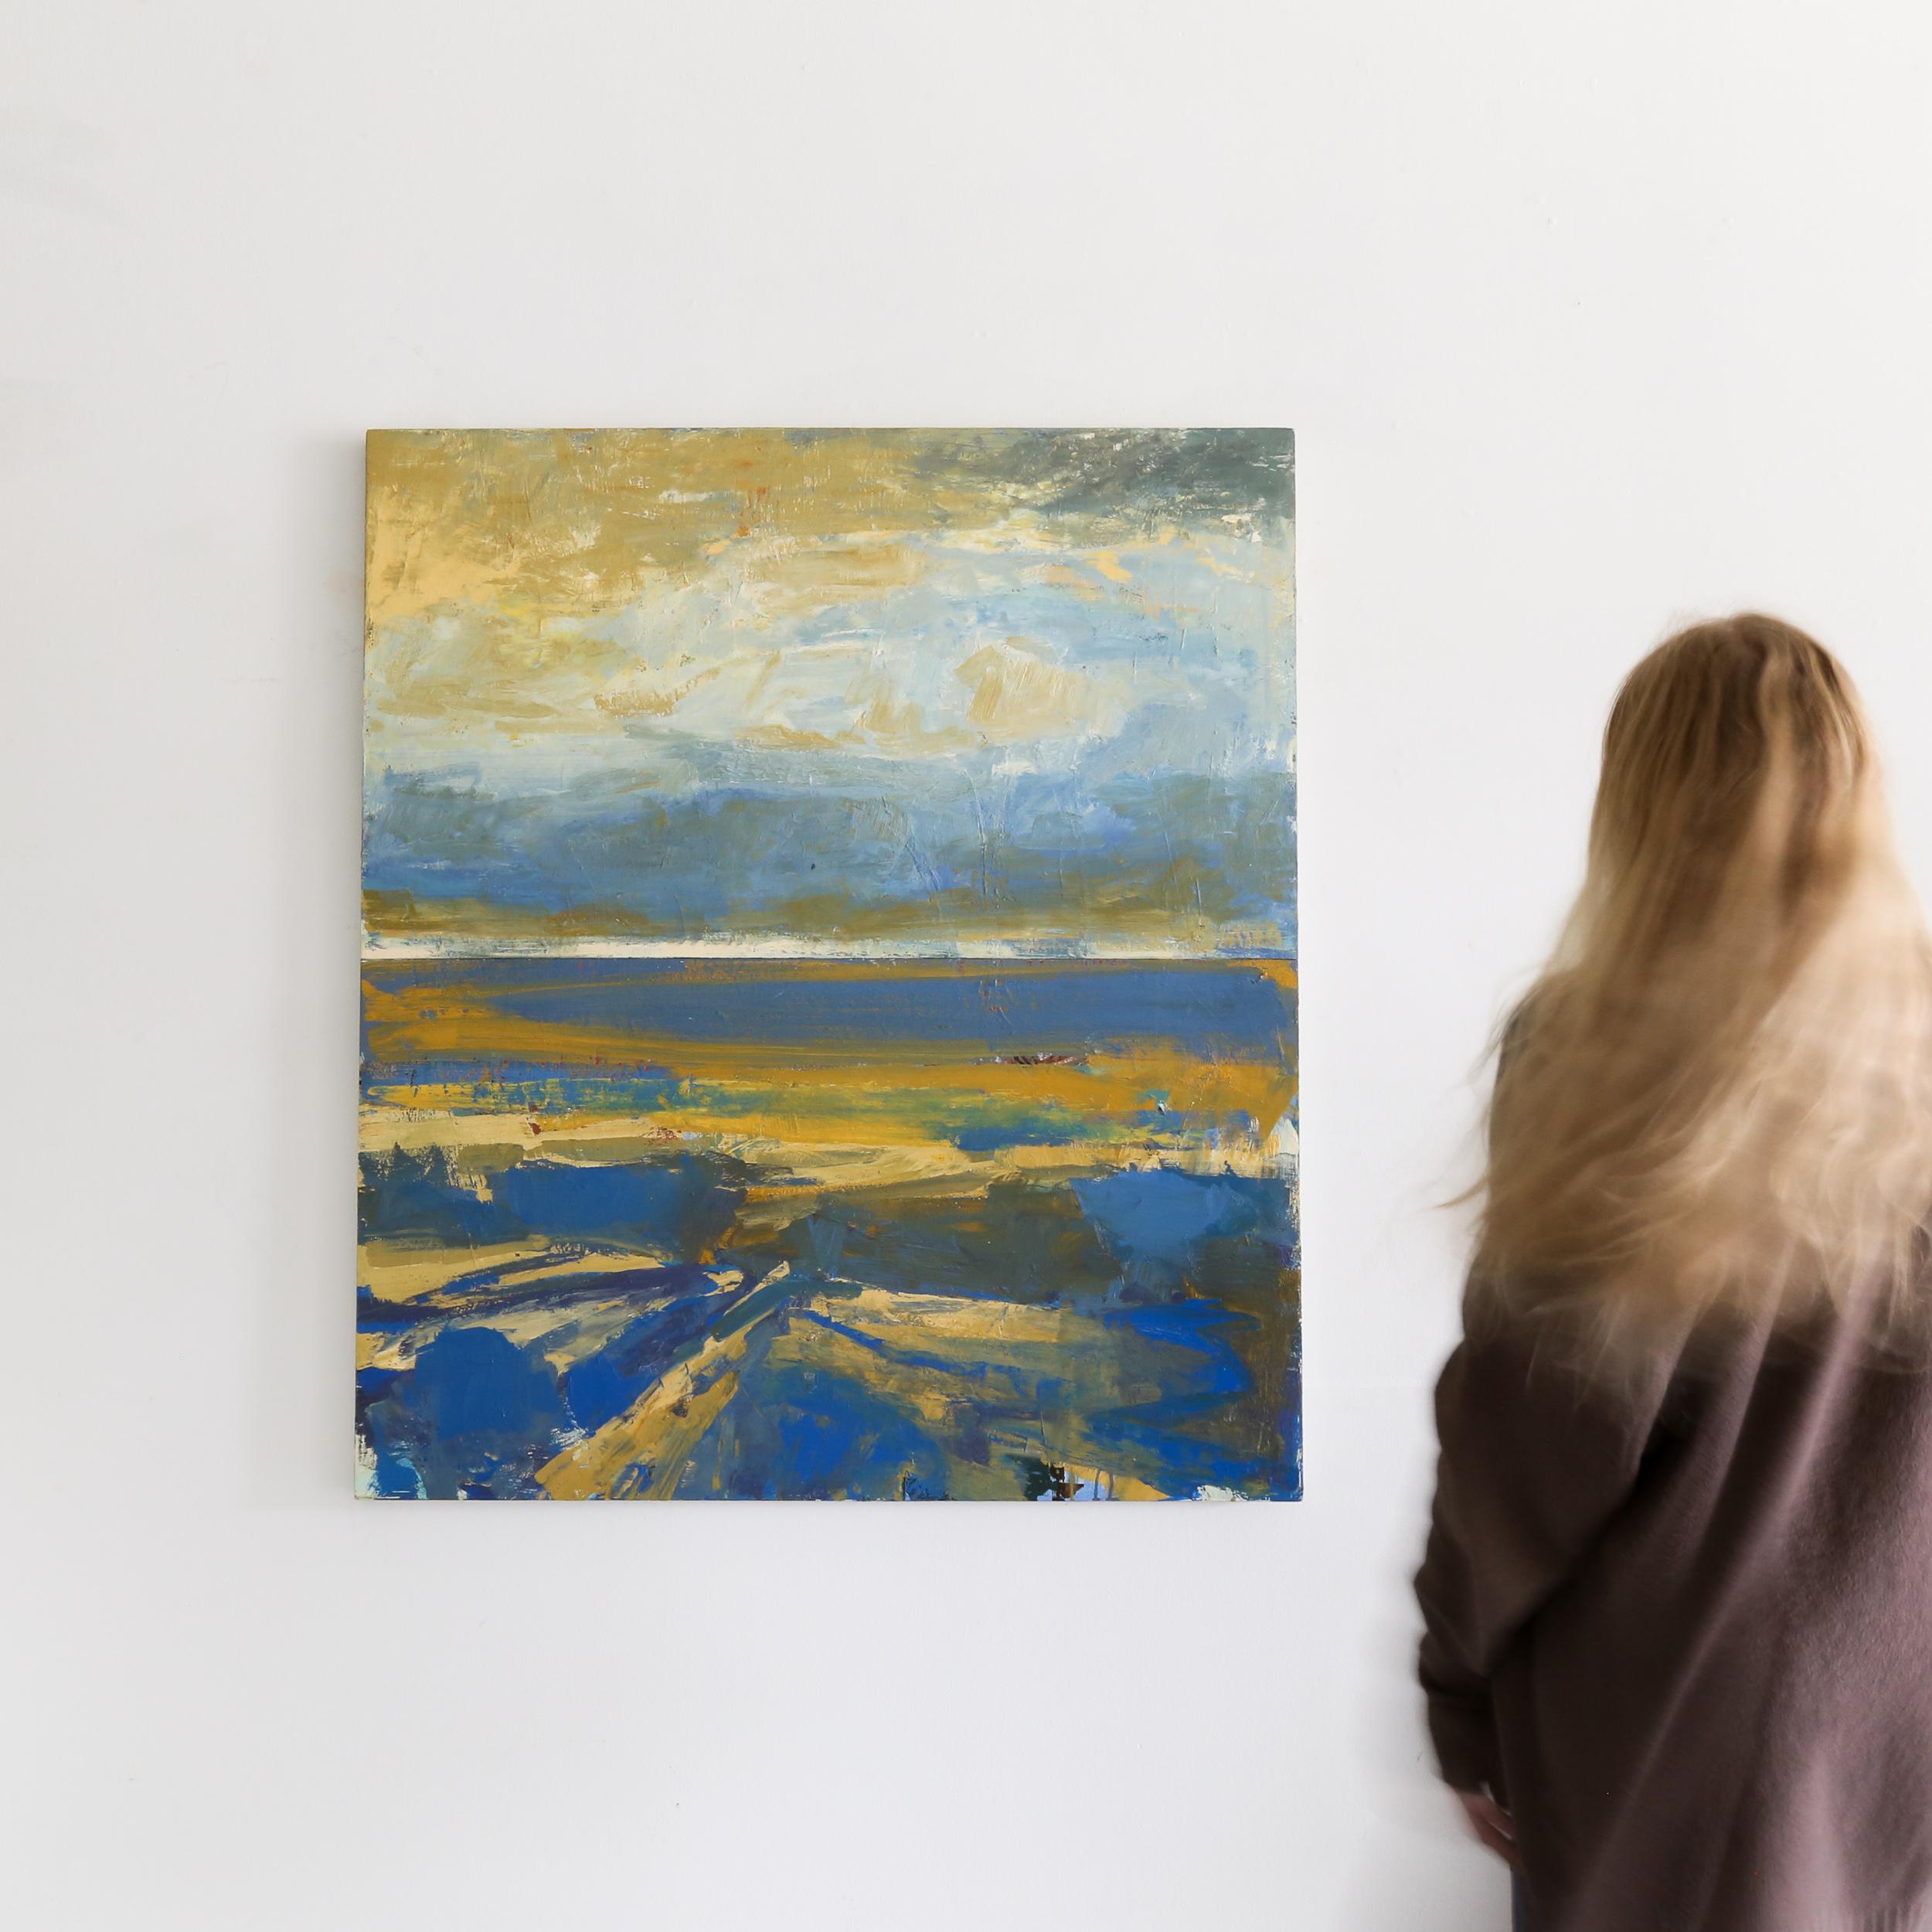 Patrick Adams
LIGHT UNDER PRESSURE
Oil on two panels
48.00 X 42.00 in
$7,000.00

In Two Worlds: the diptych landscapes

Art has a very elusive nature. On the one hand, it exists as a very concrete, physical thing made of paint, canvas, wood, or